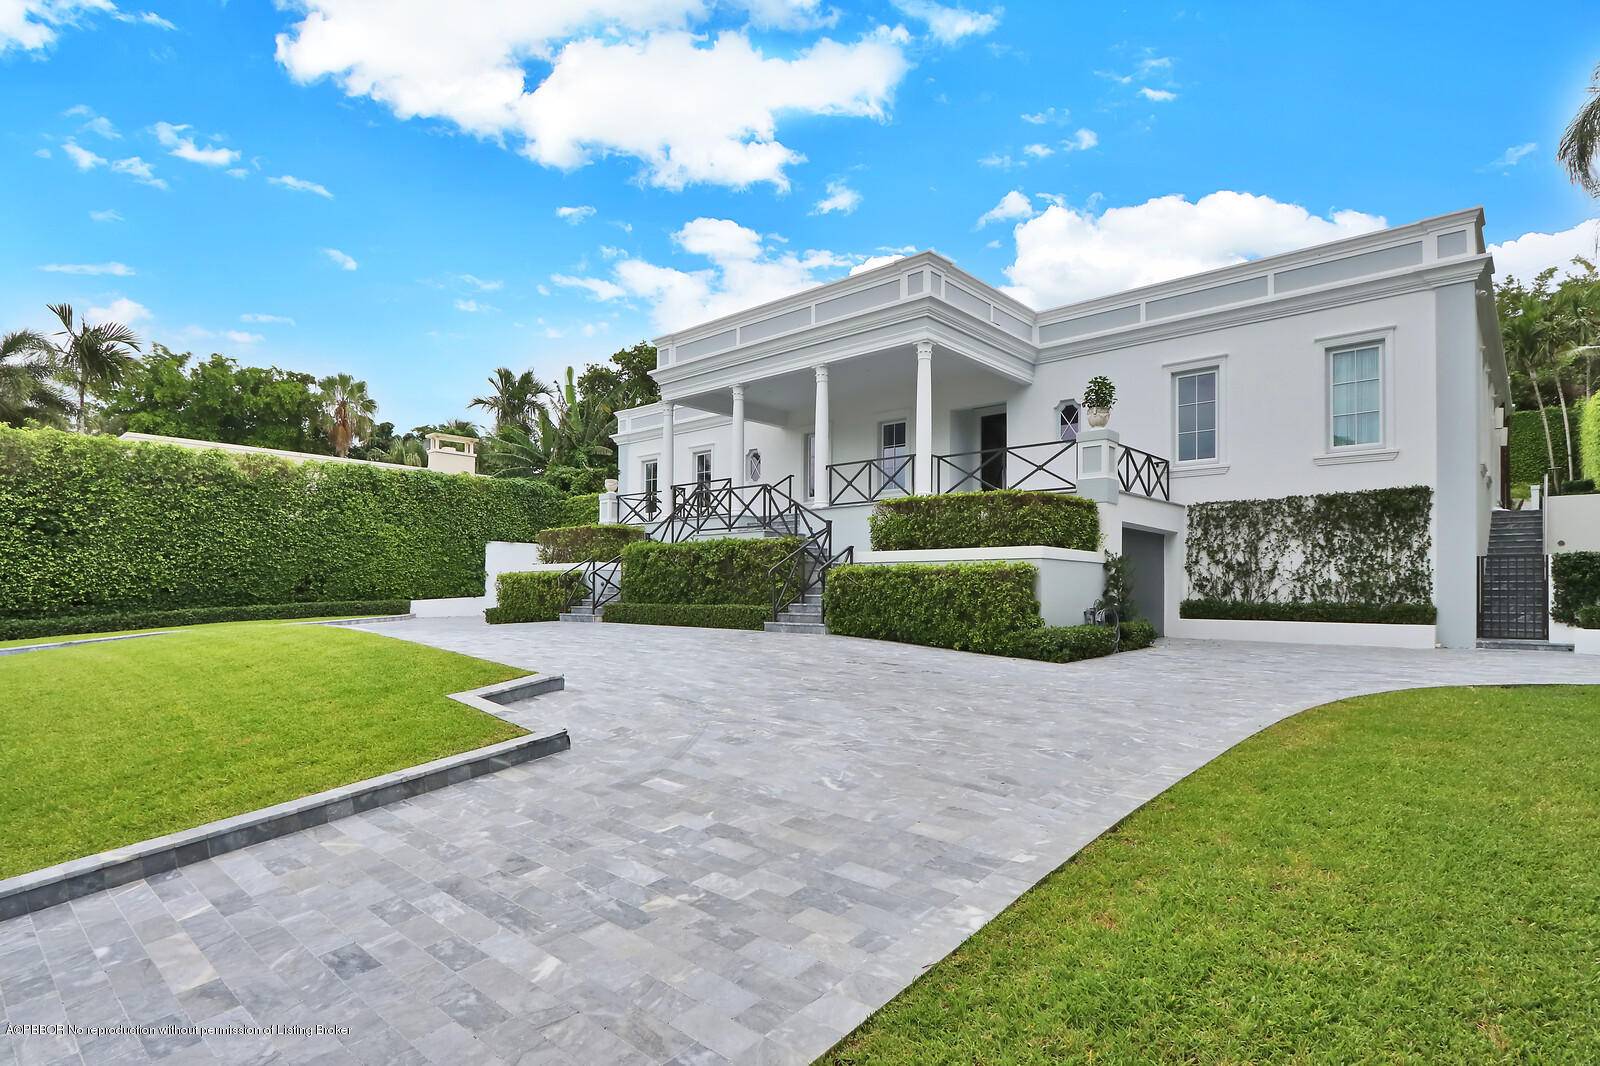 Substantial renovations are now complete at this beautifully appointed Villa.